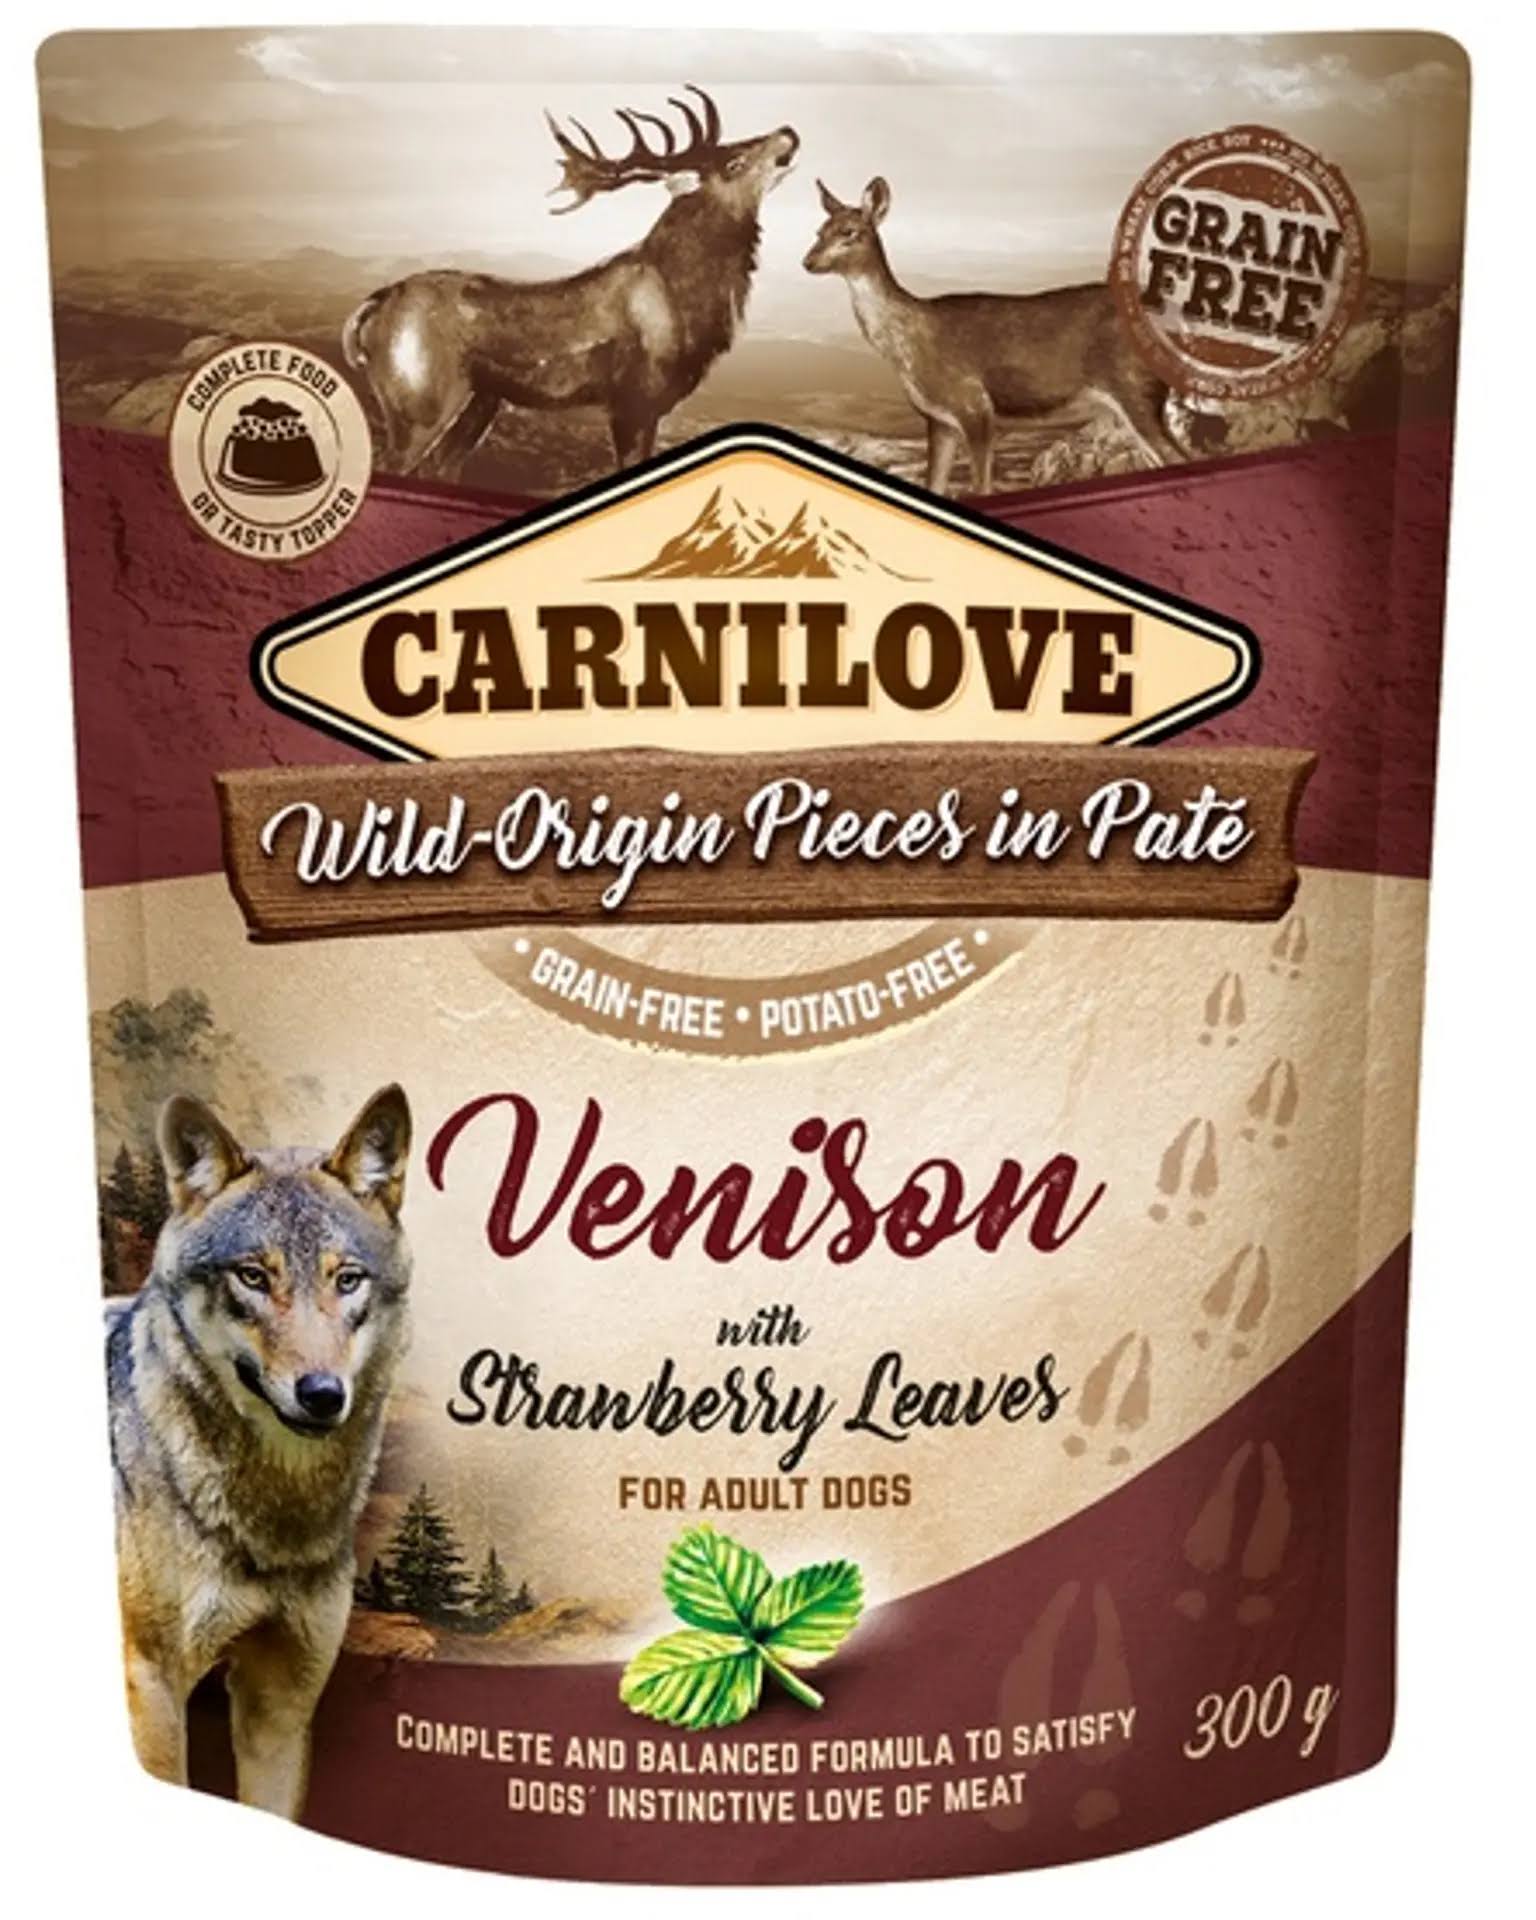 Carnilove Dog Pate Pouch 300g - Venison With Strawberry